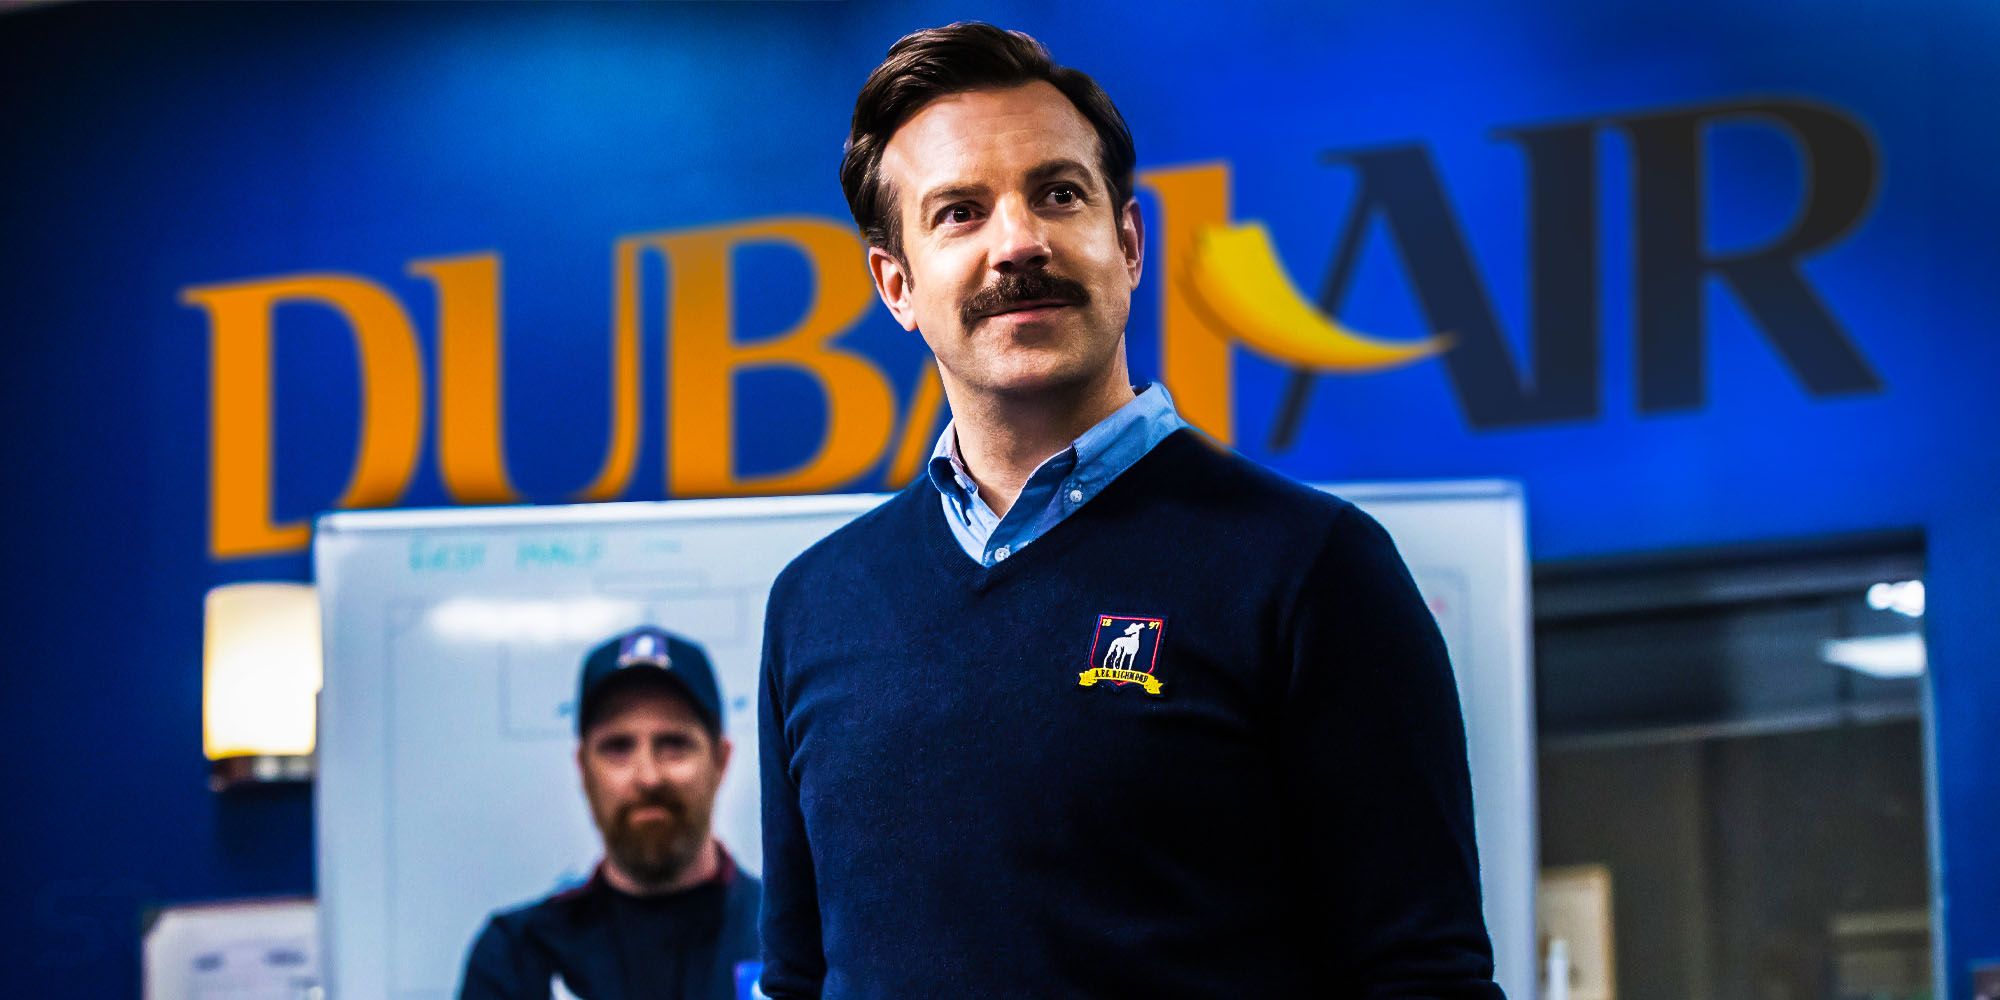 Ted Lasso: Is Dubai Air Real? Season 2 Controversy Explained